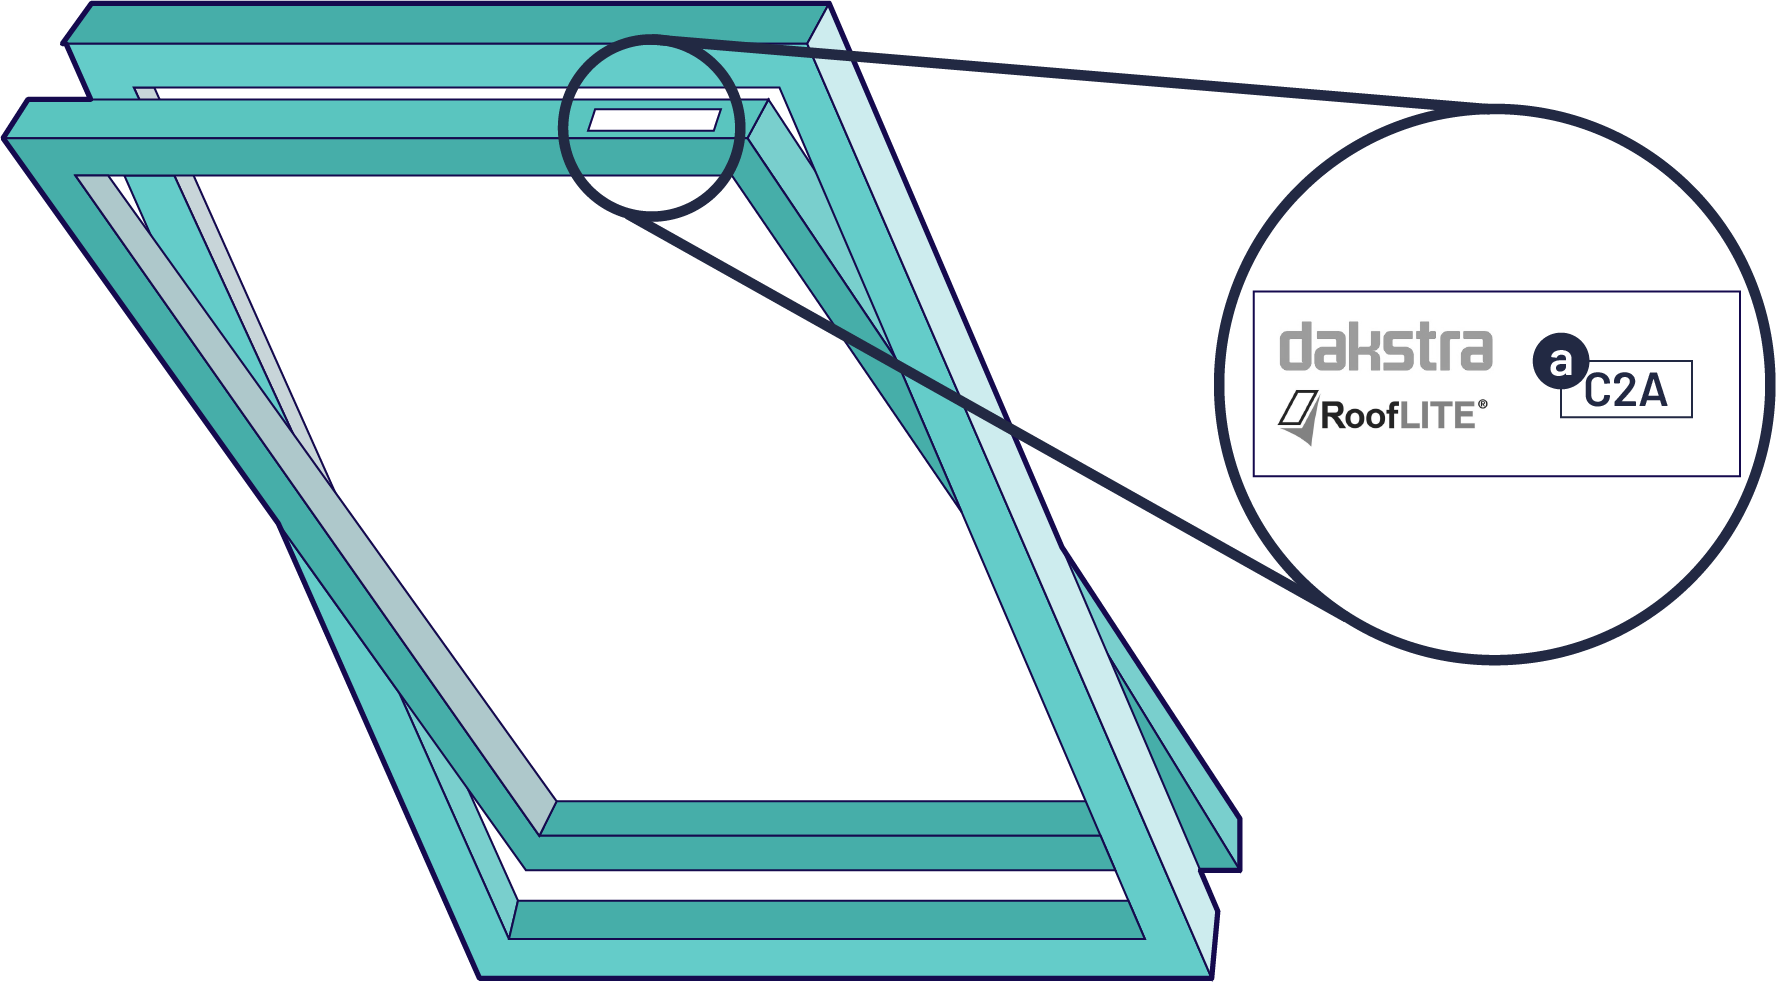 A skylight window showing where to find your Dakstra code